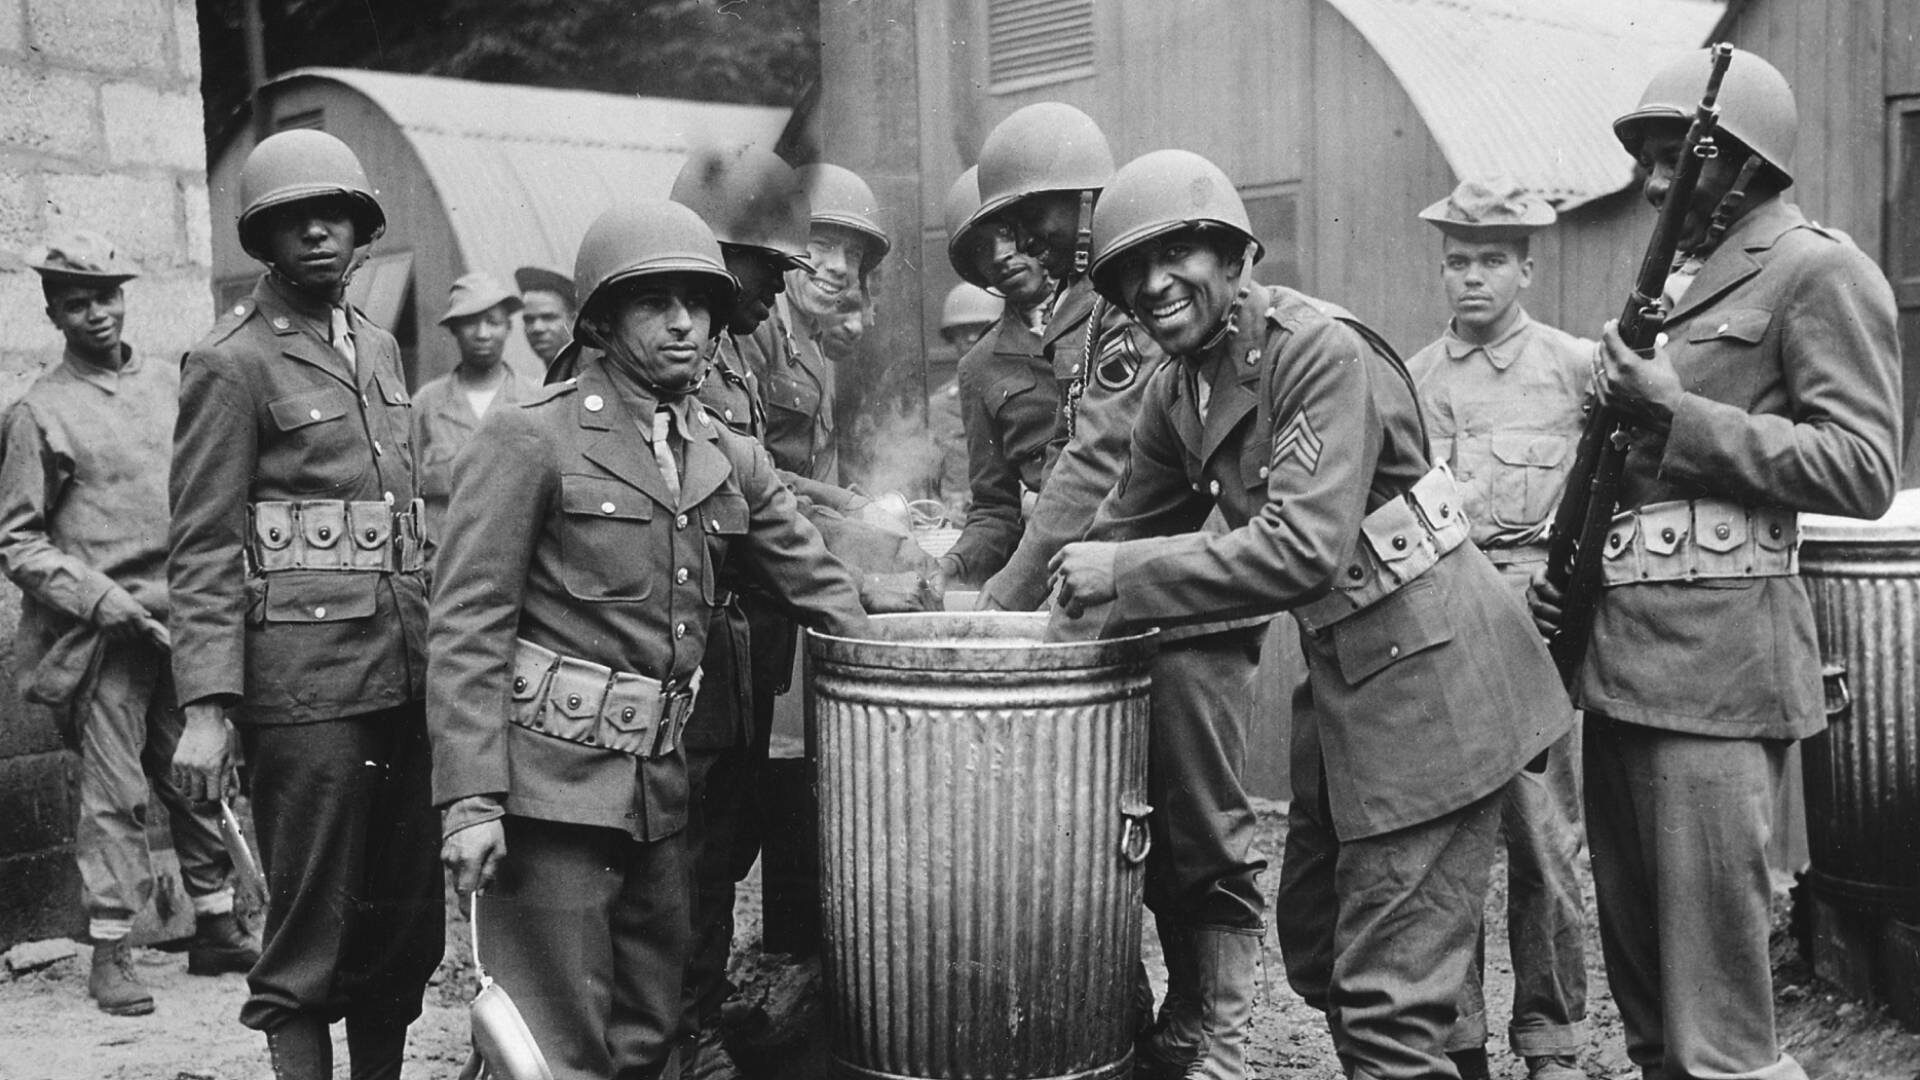 A group of black service personnel serving in the U.S. Army draw rations at a cookhouse in Northern Ireland in 1942